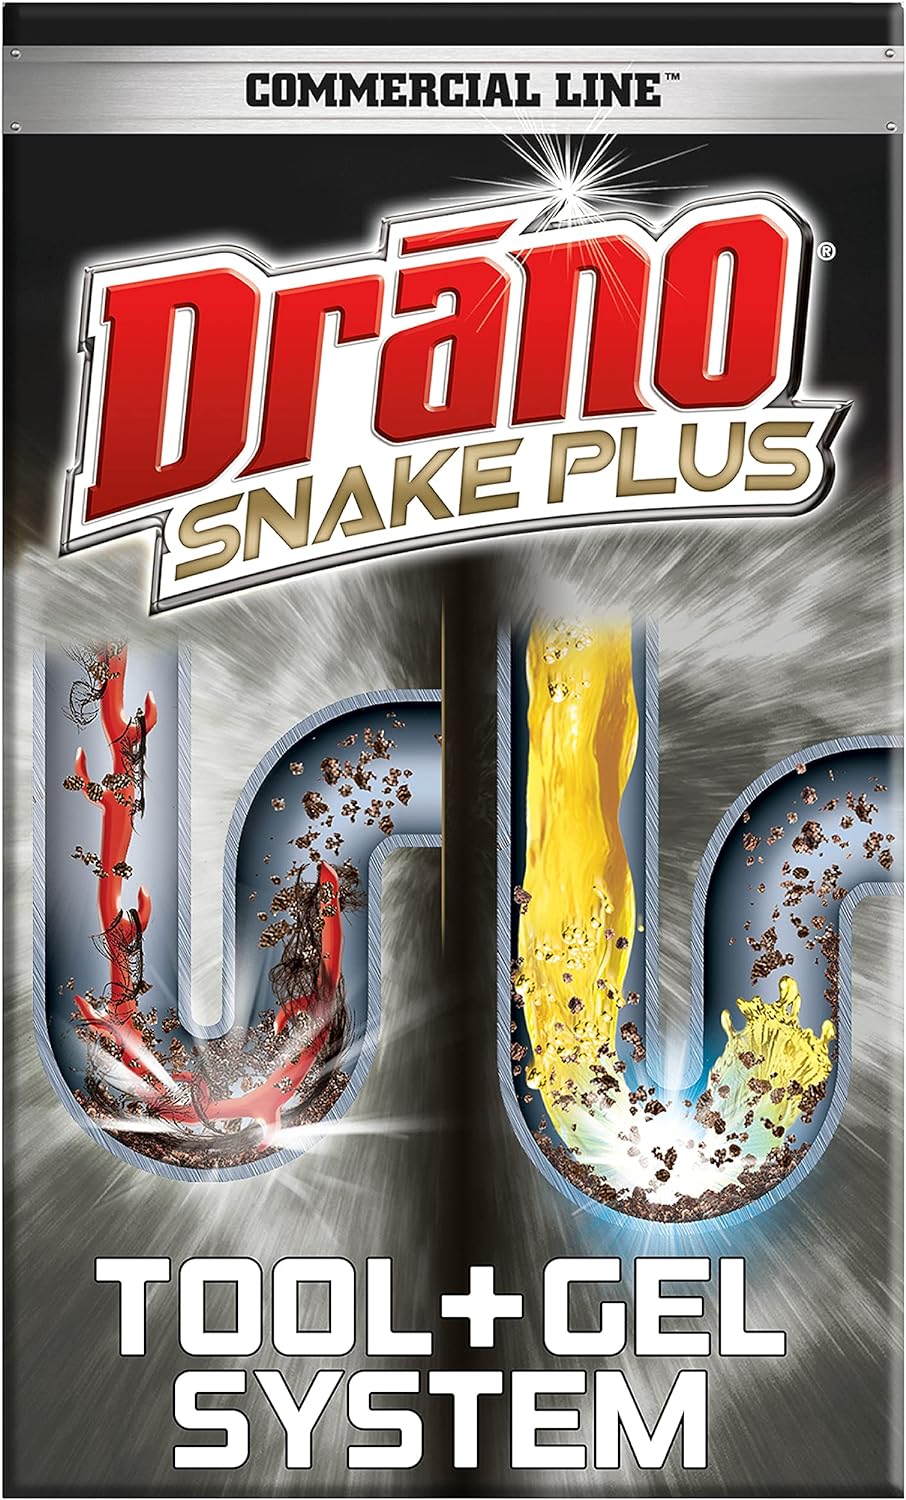 Drano Gel Drain Clog Remover and Cleaner 16oz and Snake Plus Tool 23 inches, Unclogs tough blockages, Commercial Line